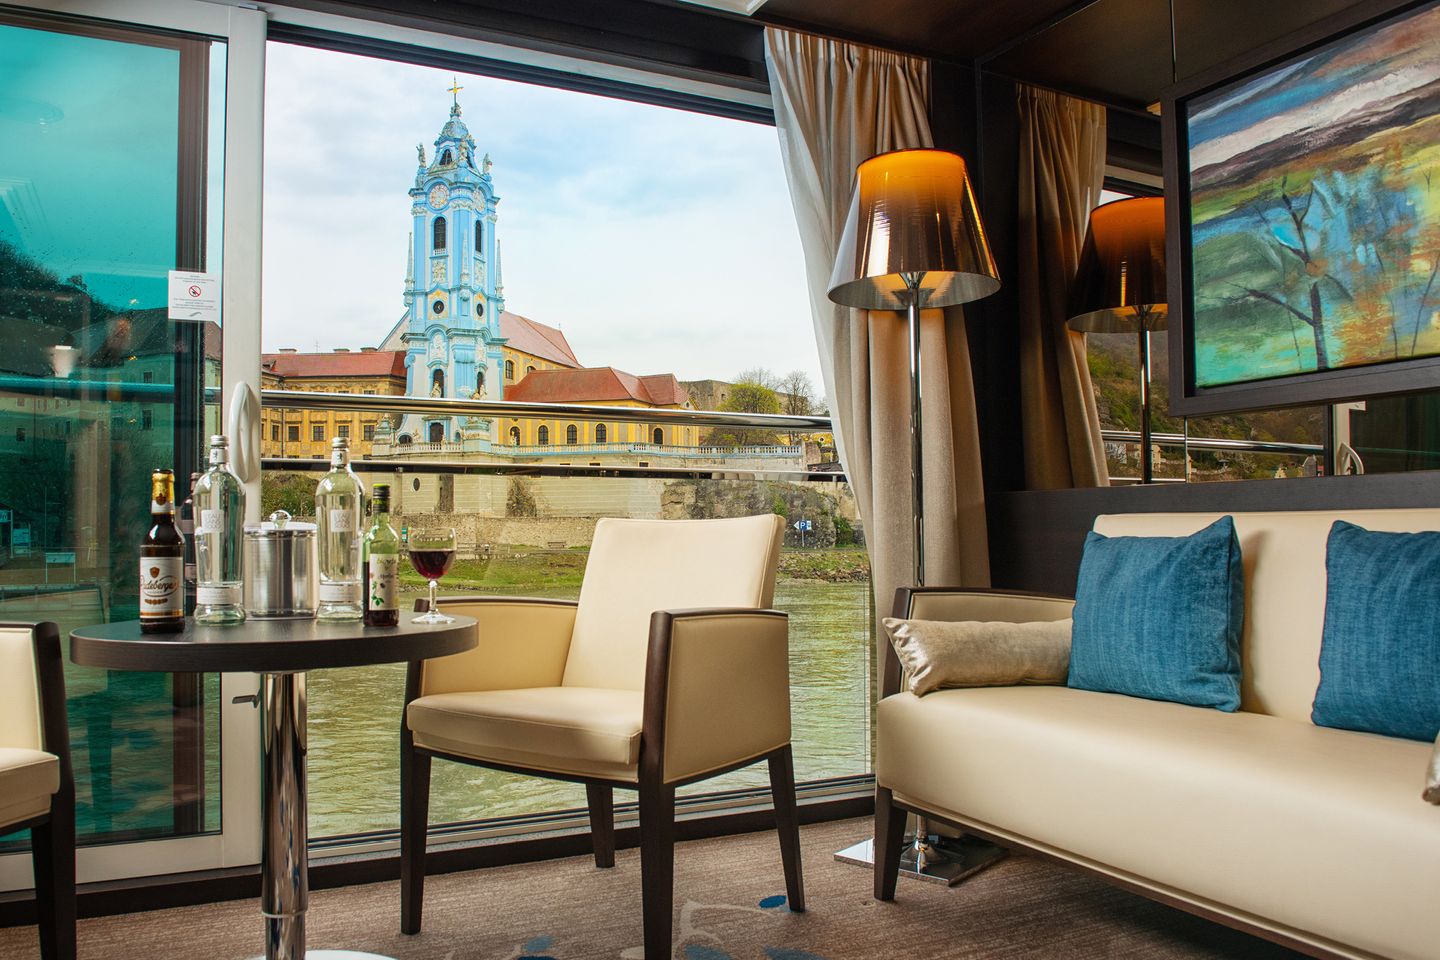 Active & Discovery On The Danube With 1 Night In Budapest & 2 Nights In Prague (Westbound)